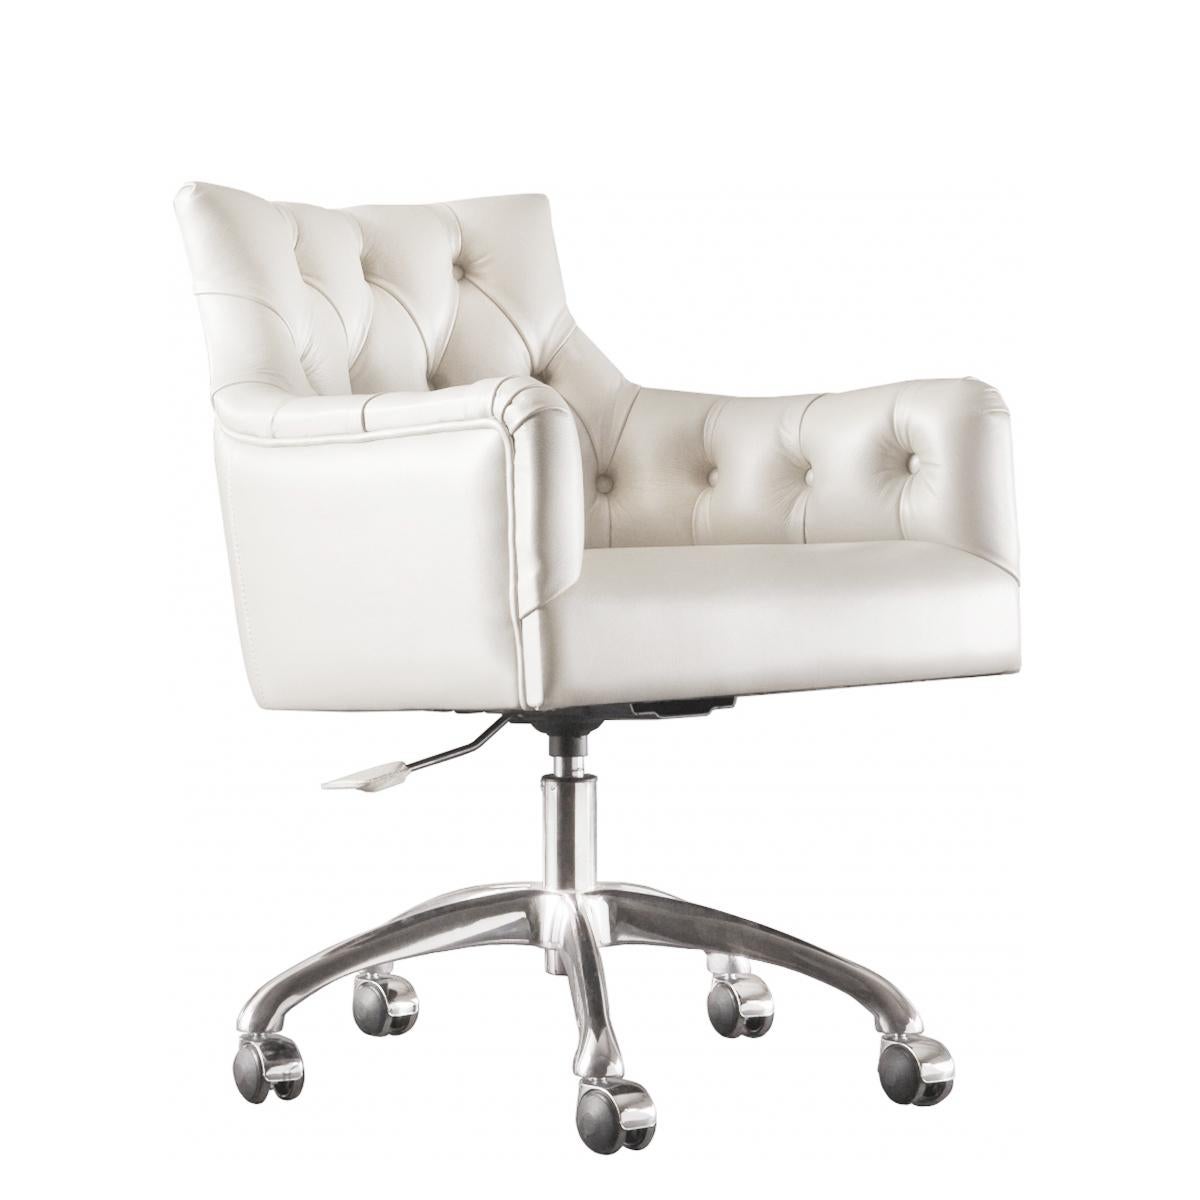 Armchair Icart office with solid wood structure,
upholstered and covered with capitonated Italian
white genuine leather and back seat covered with
white genuine leather. On swivel polished stainless
steel base with 5 casters. Adjustable height